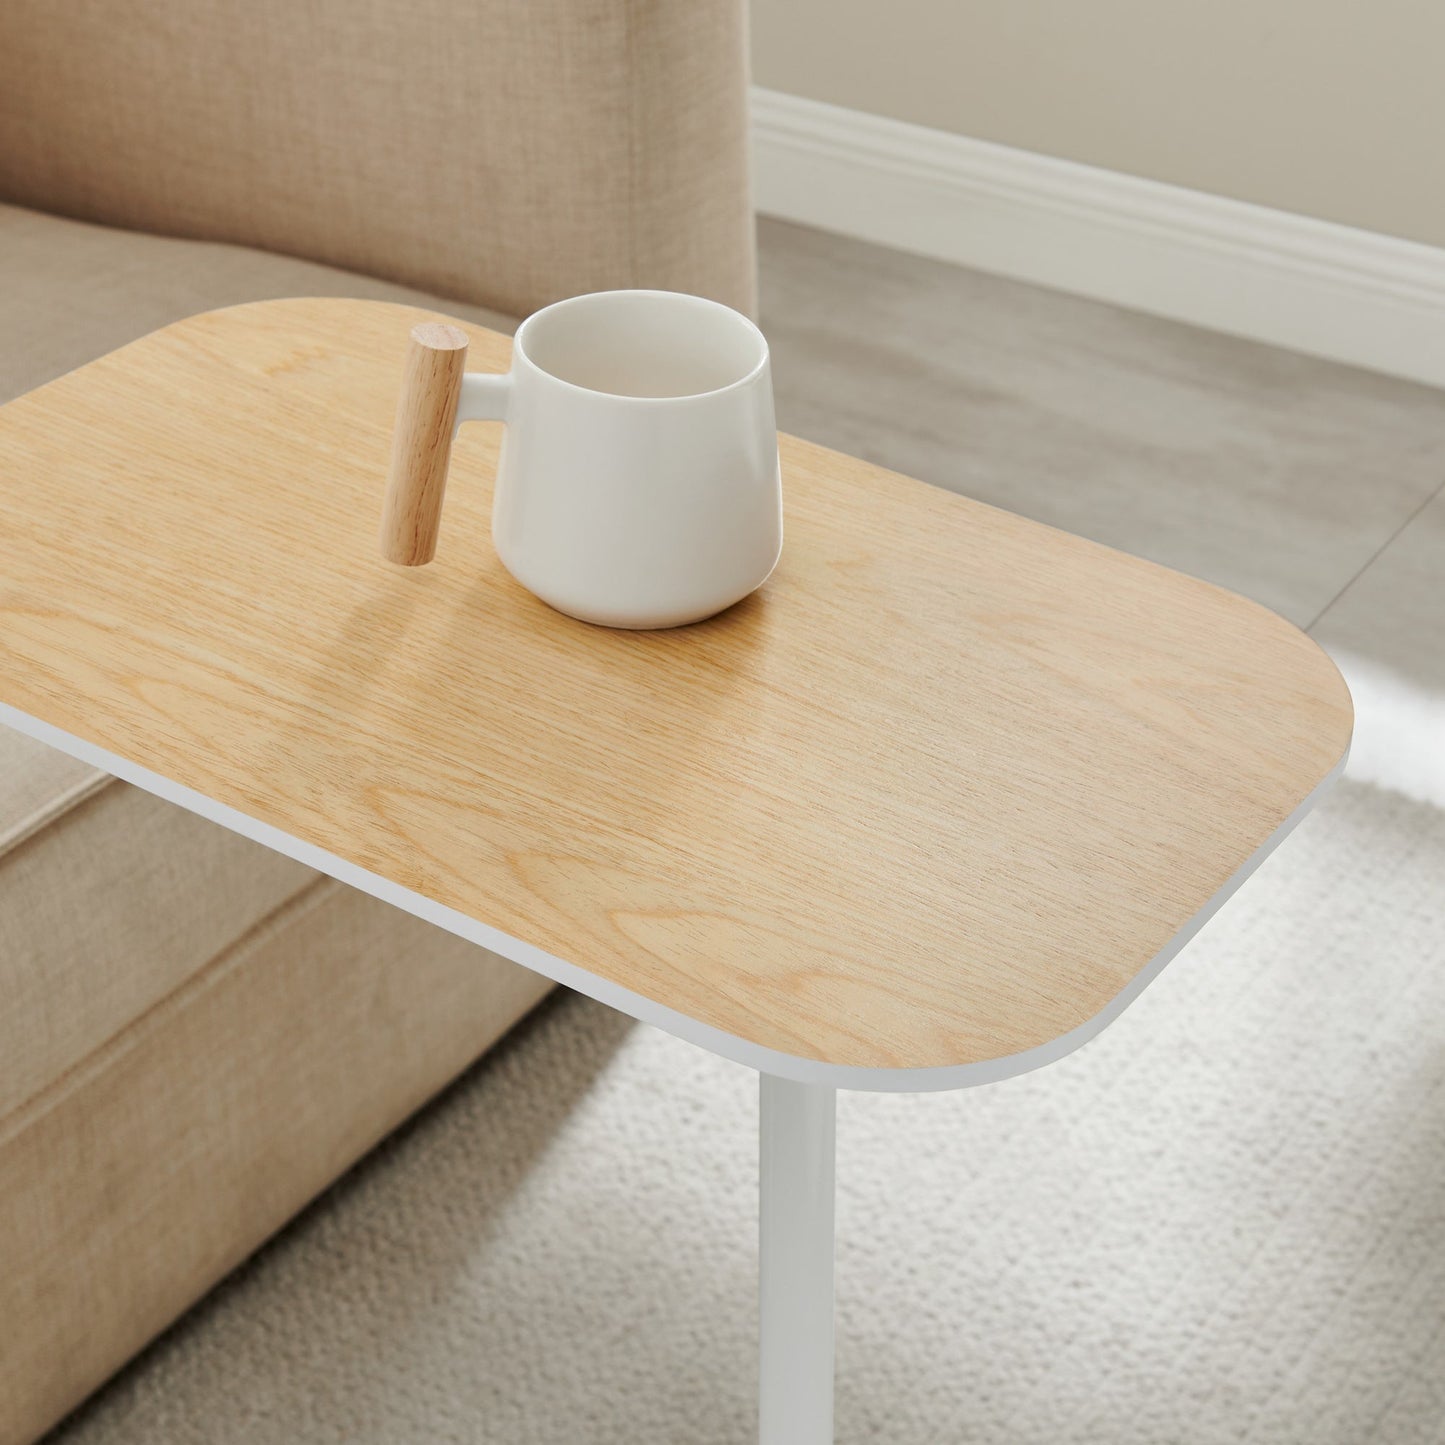 DEANNA Side Table in White and Light Oak